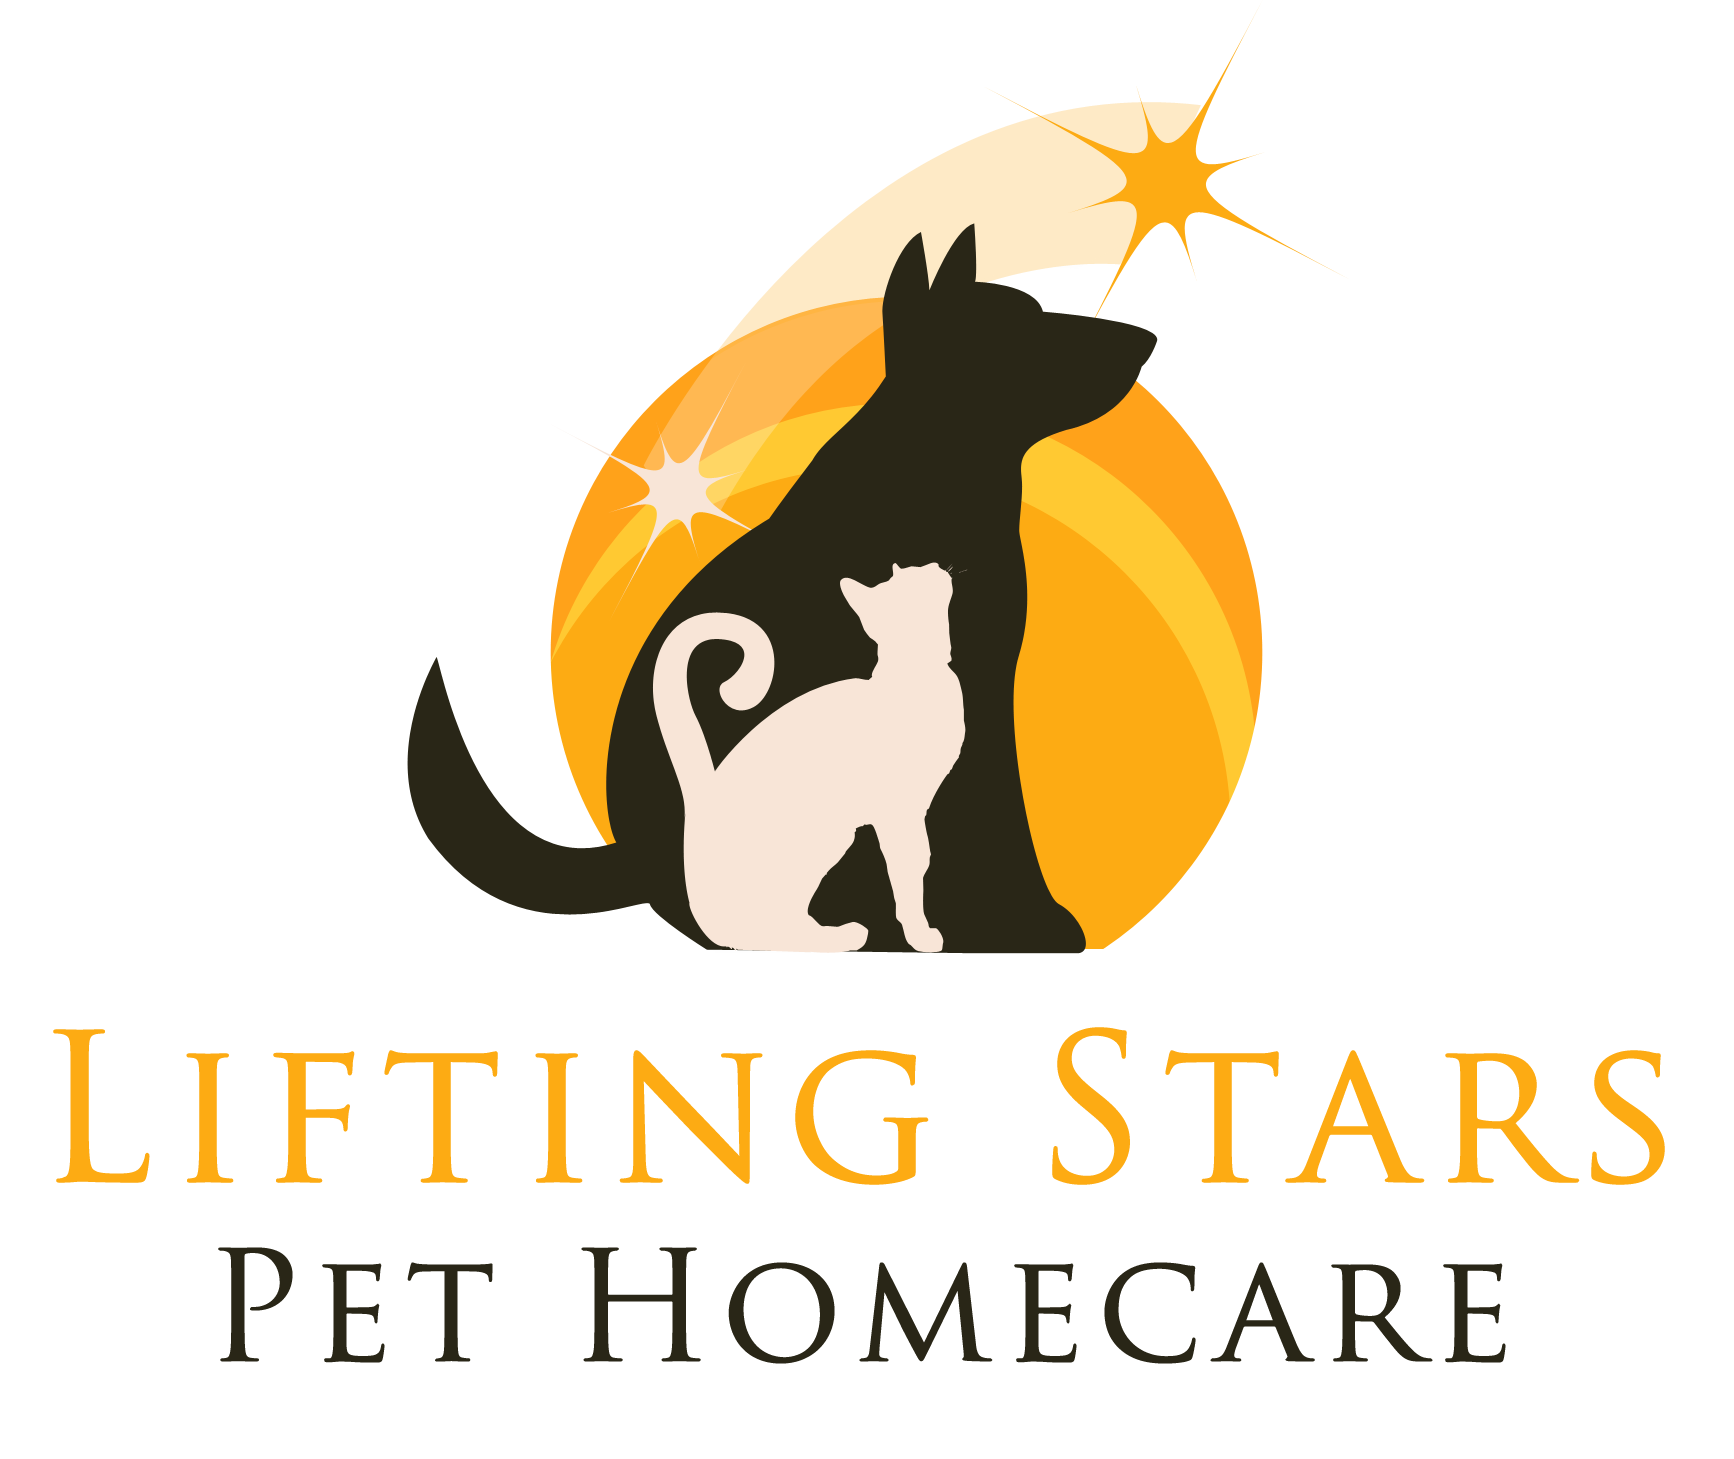 Veterinary Jobs In Vancouver | Lifting Stars Pet Homecare